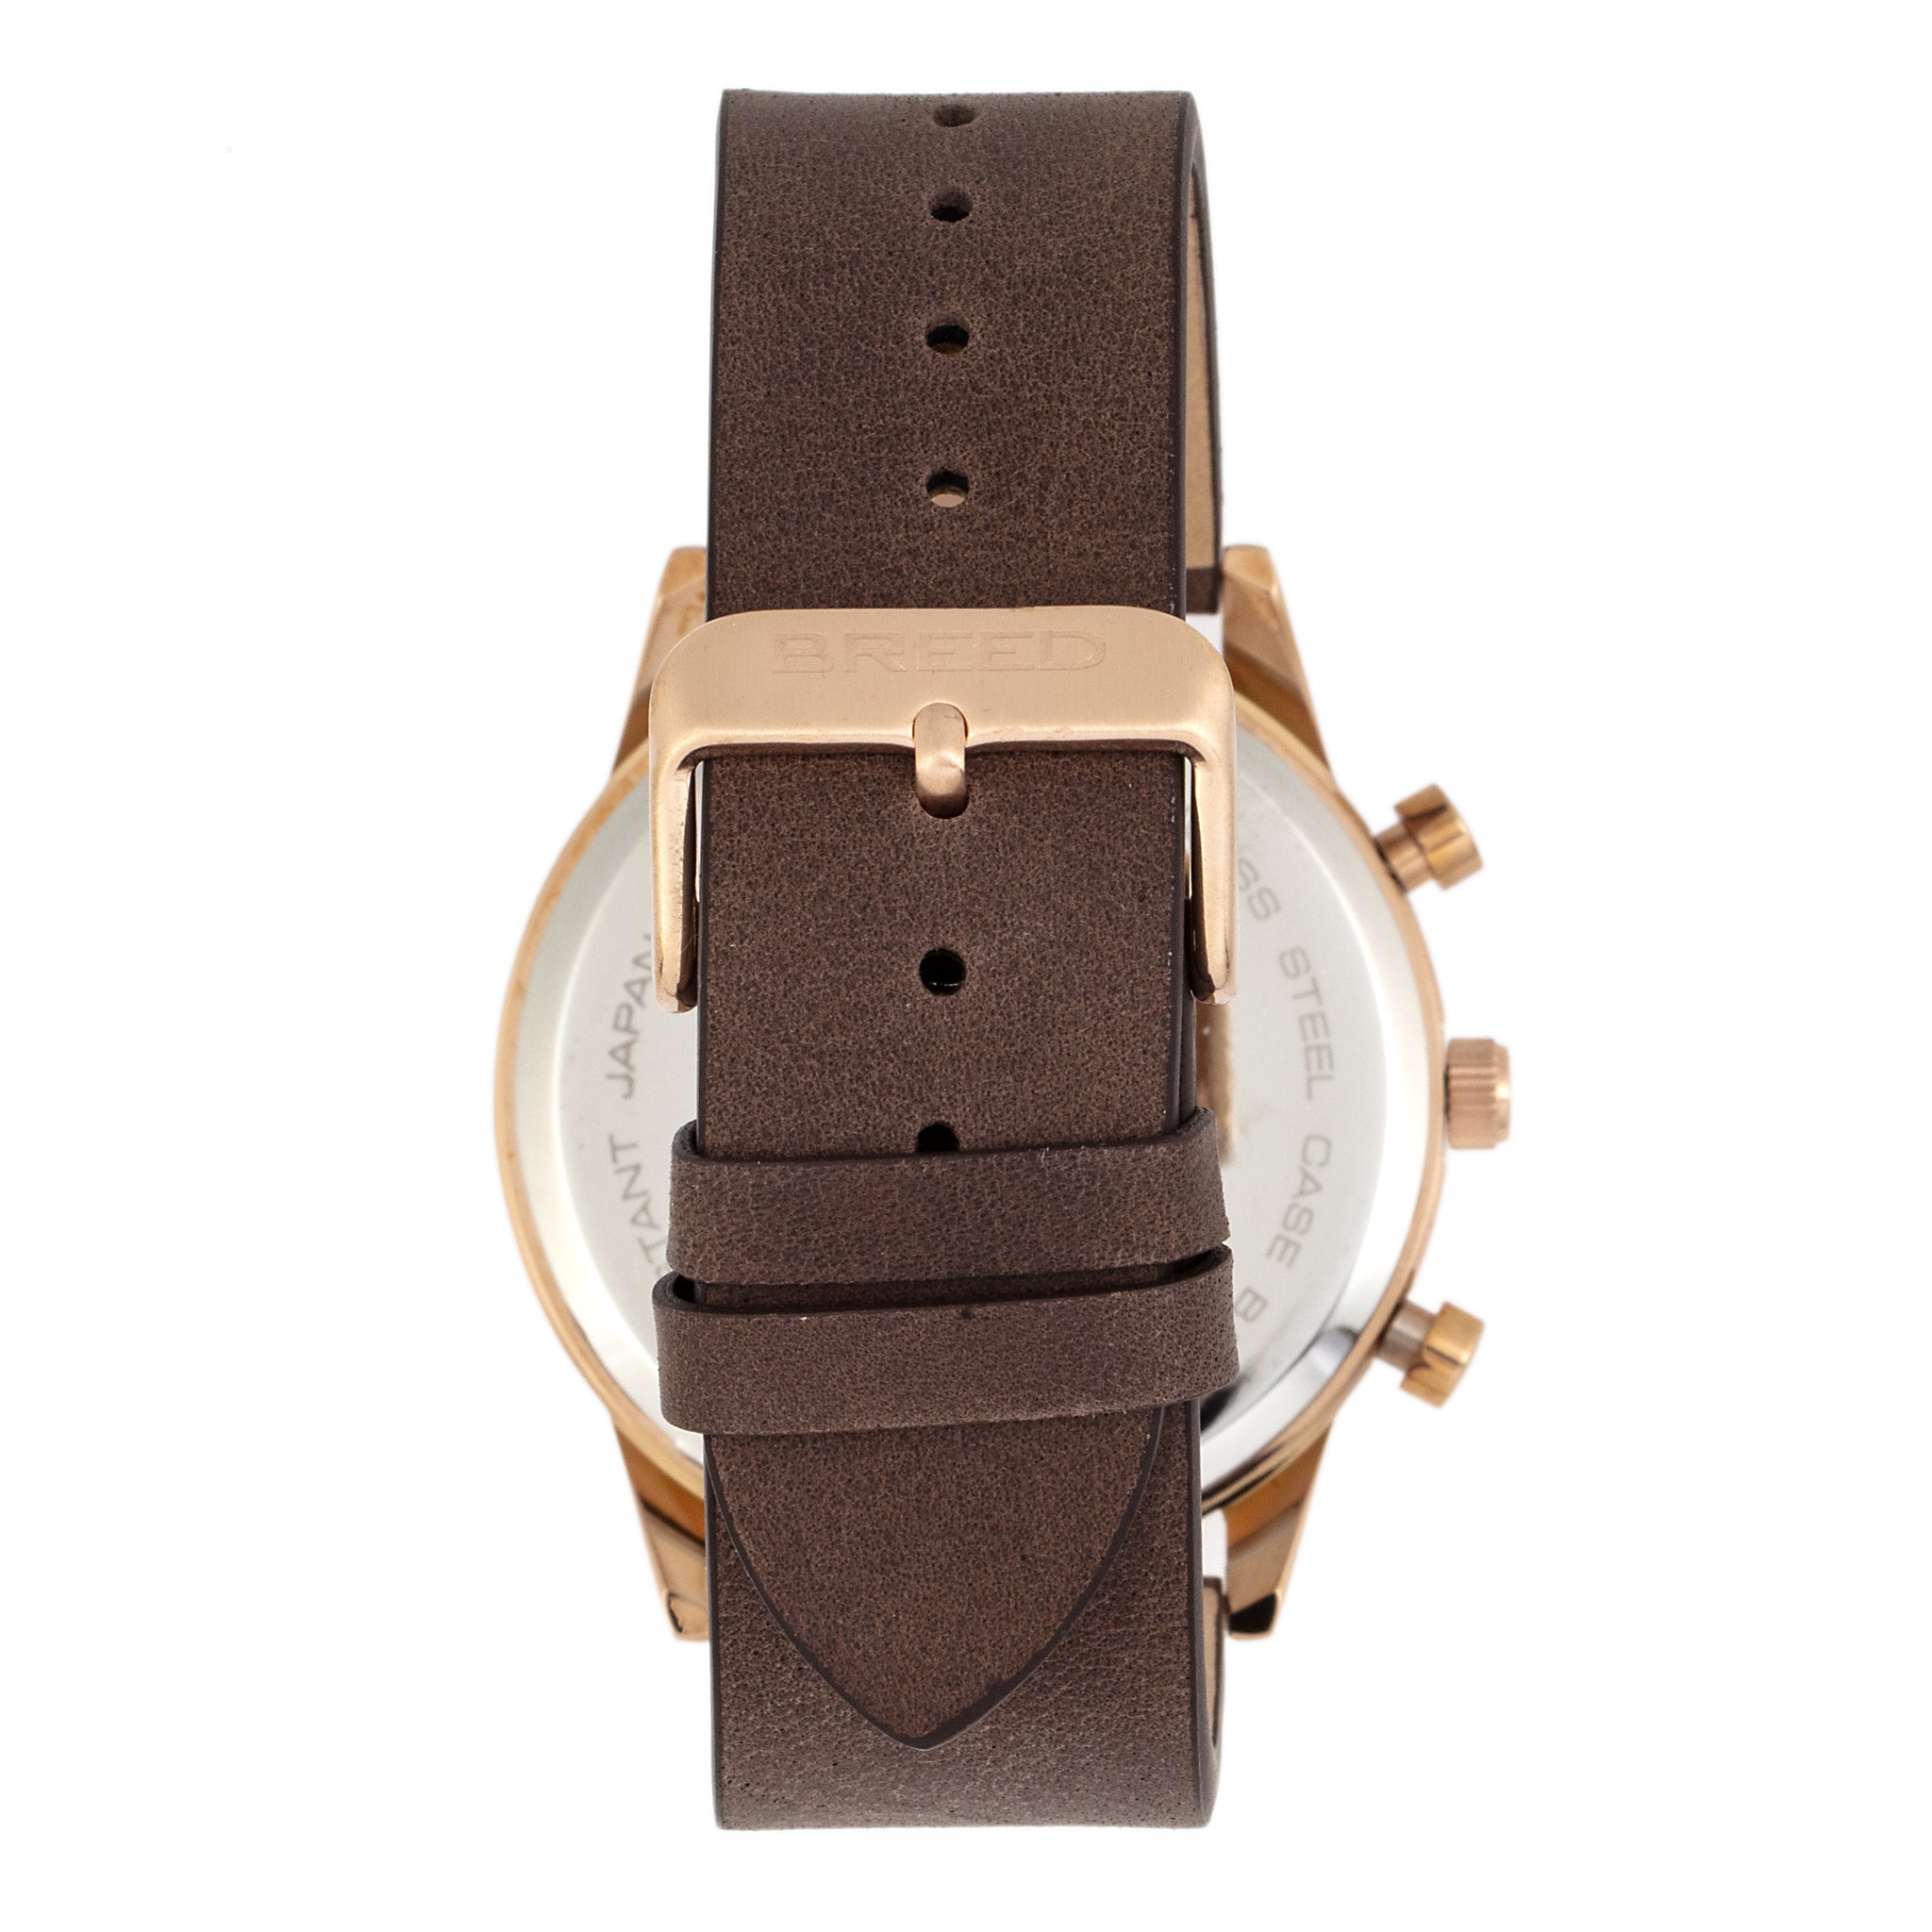 Breed Andreas Leather-Band Watch w/ Date - Rose Gold/Dark Brown - BRD8707